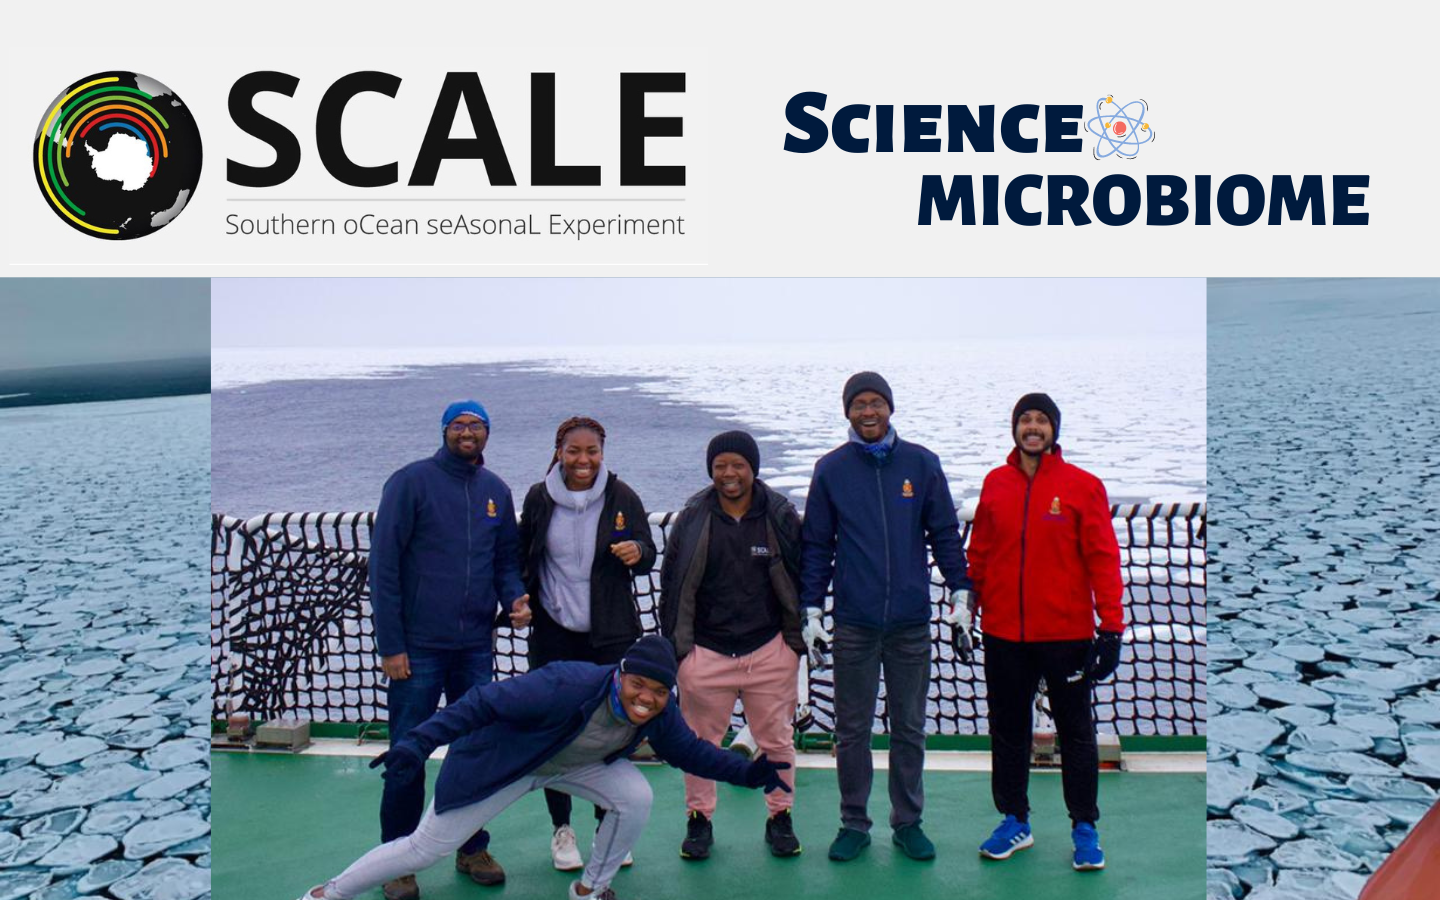 SCALE-WIN22: Science Team MICROBIOME